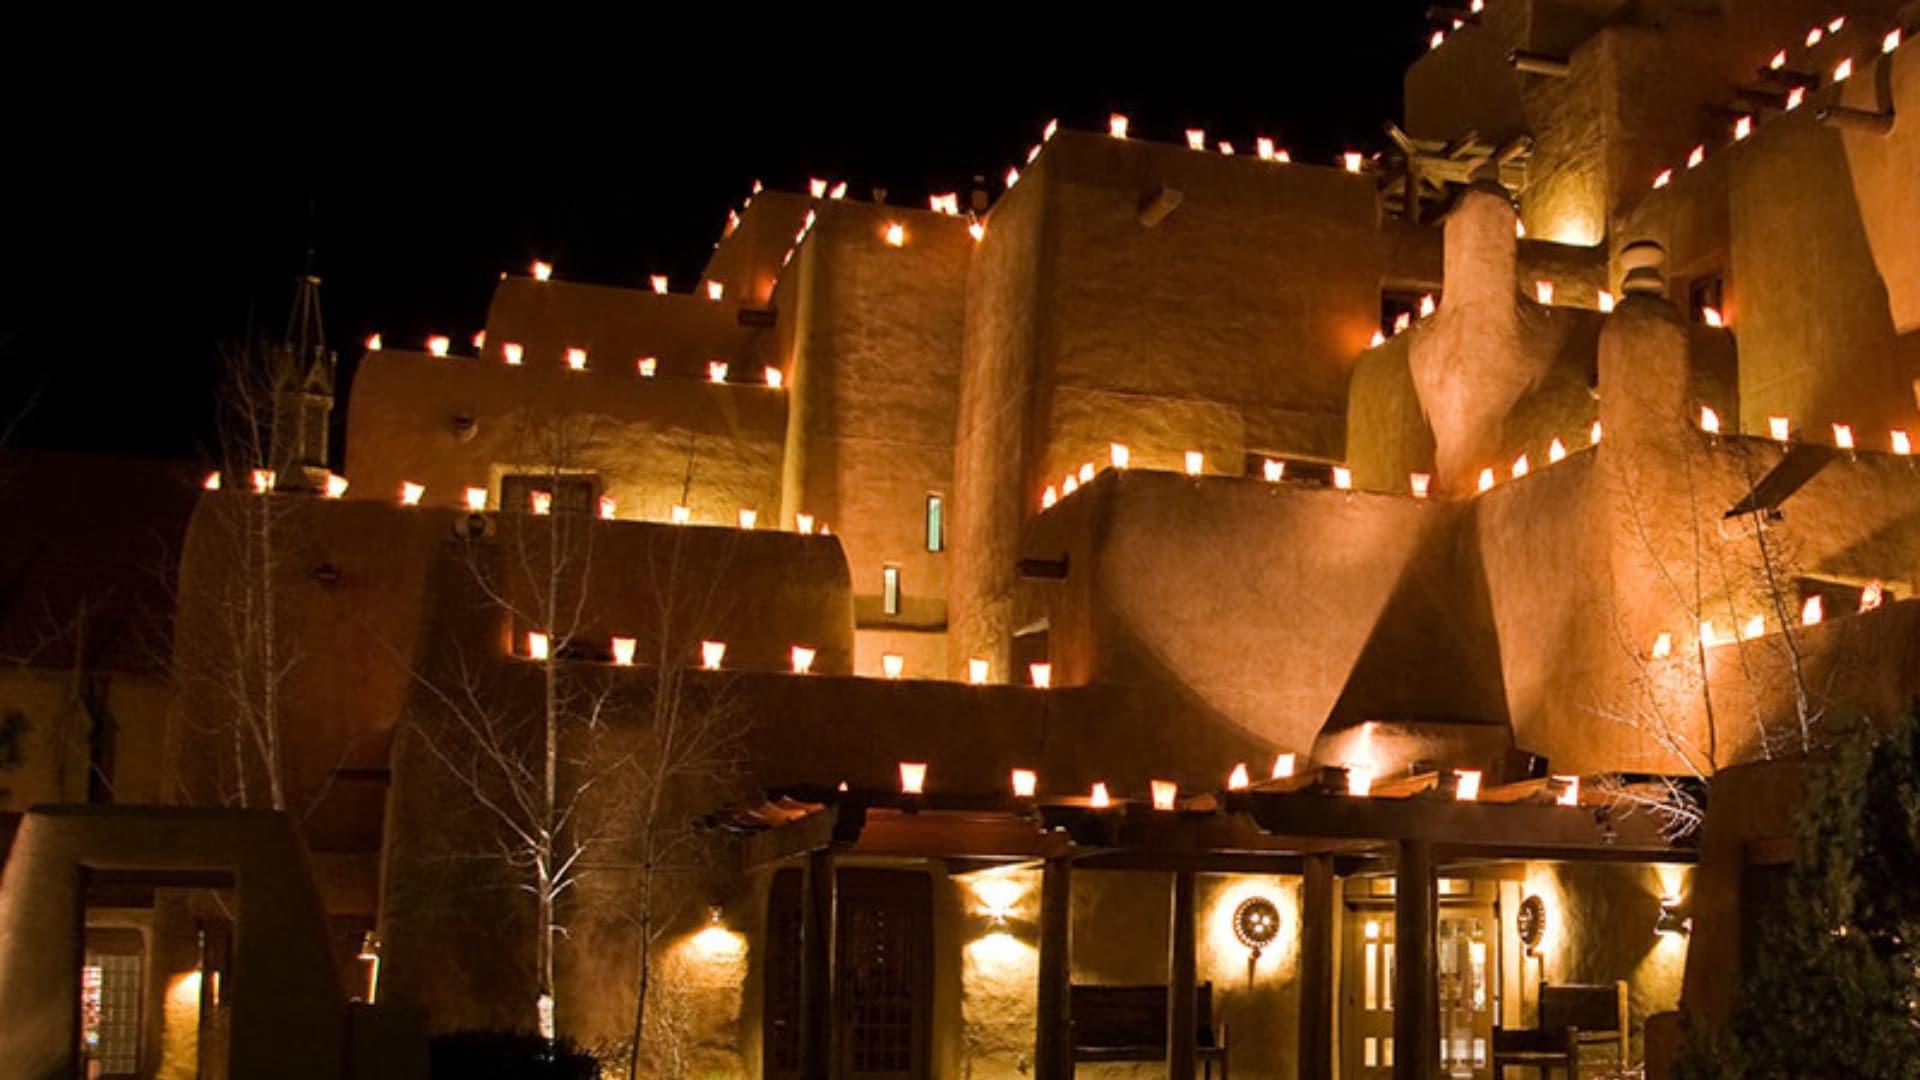 Candlelit farolitos lined on a traditional Santa Fe building at Christmastime